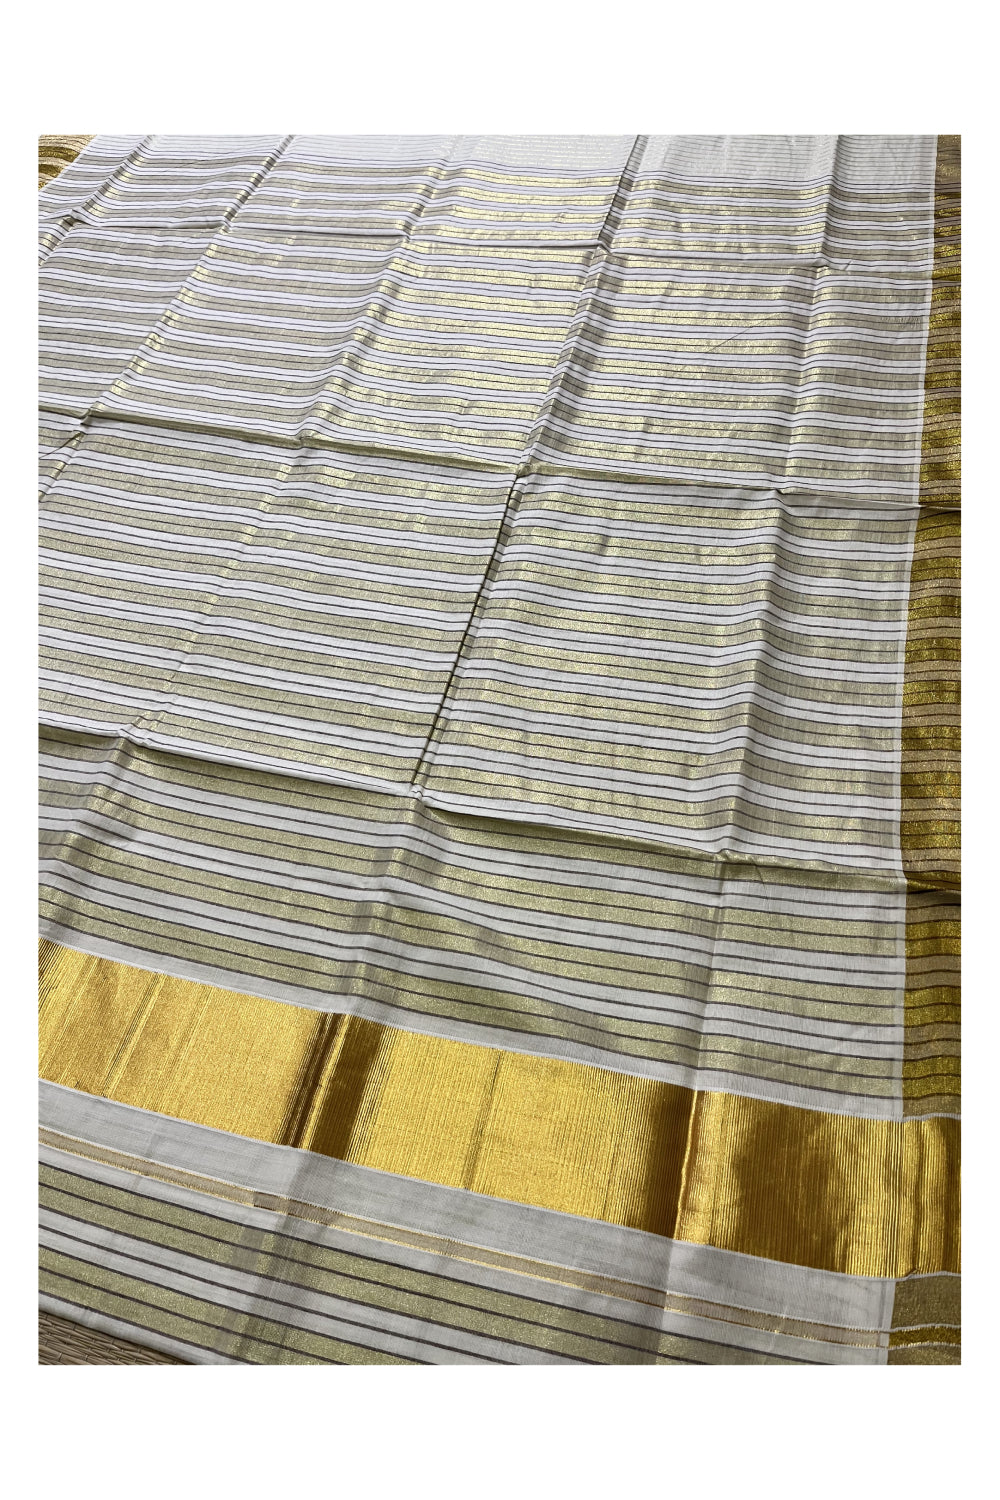 Pure Cotton Kerala Kasavu Saree with Lines Designs on Body and Brown Lines on Munthani